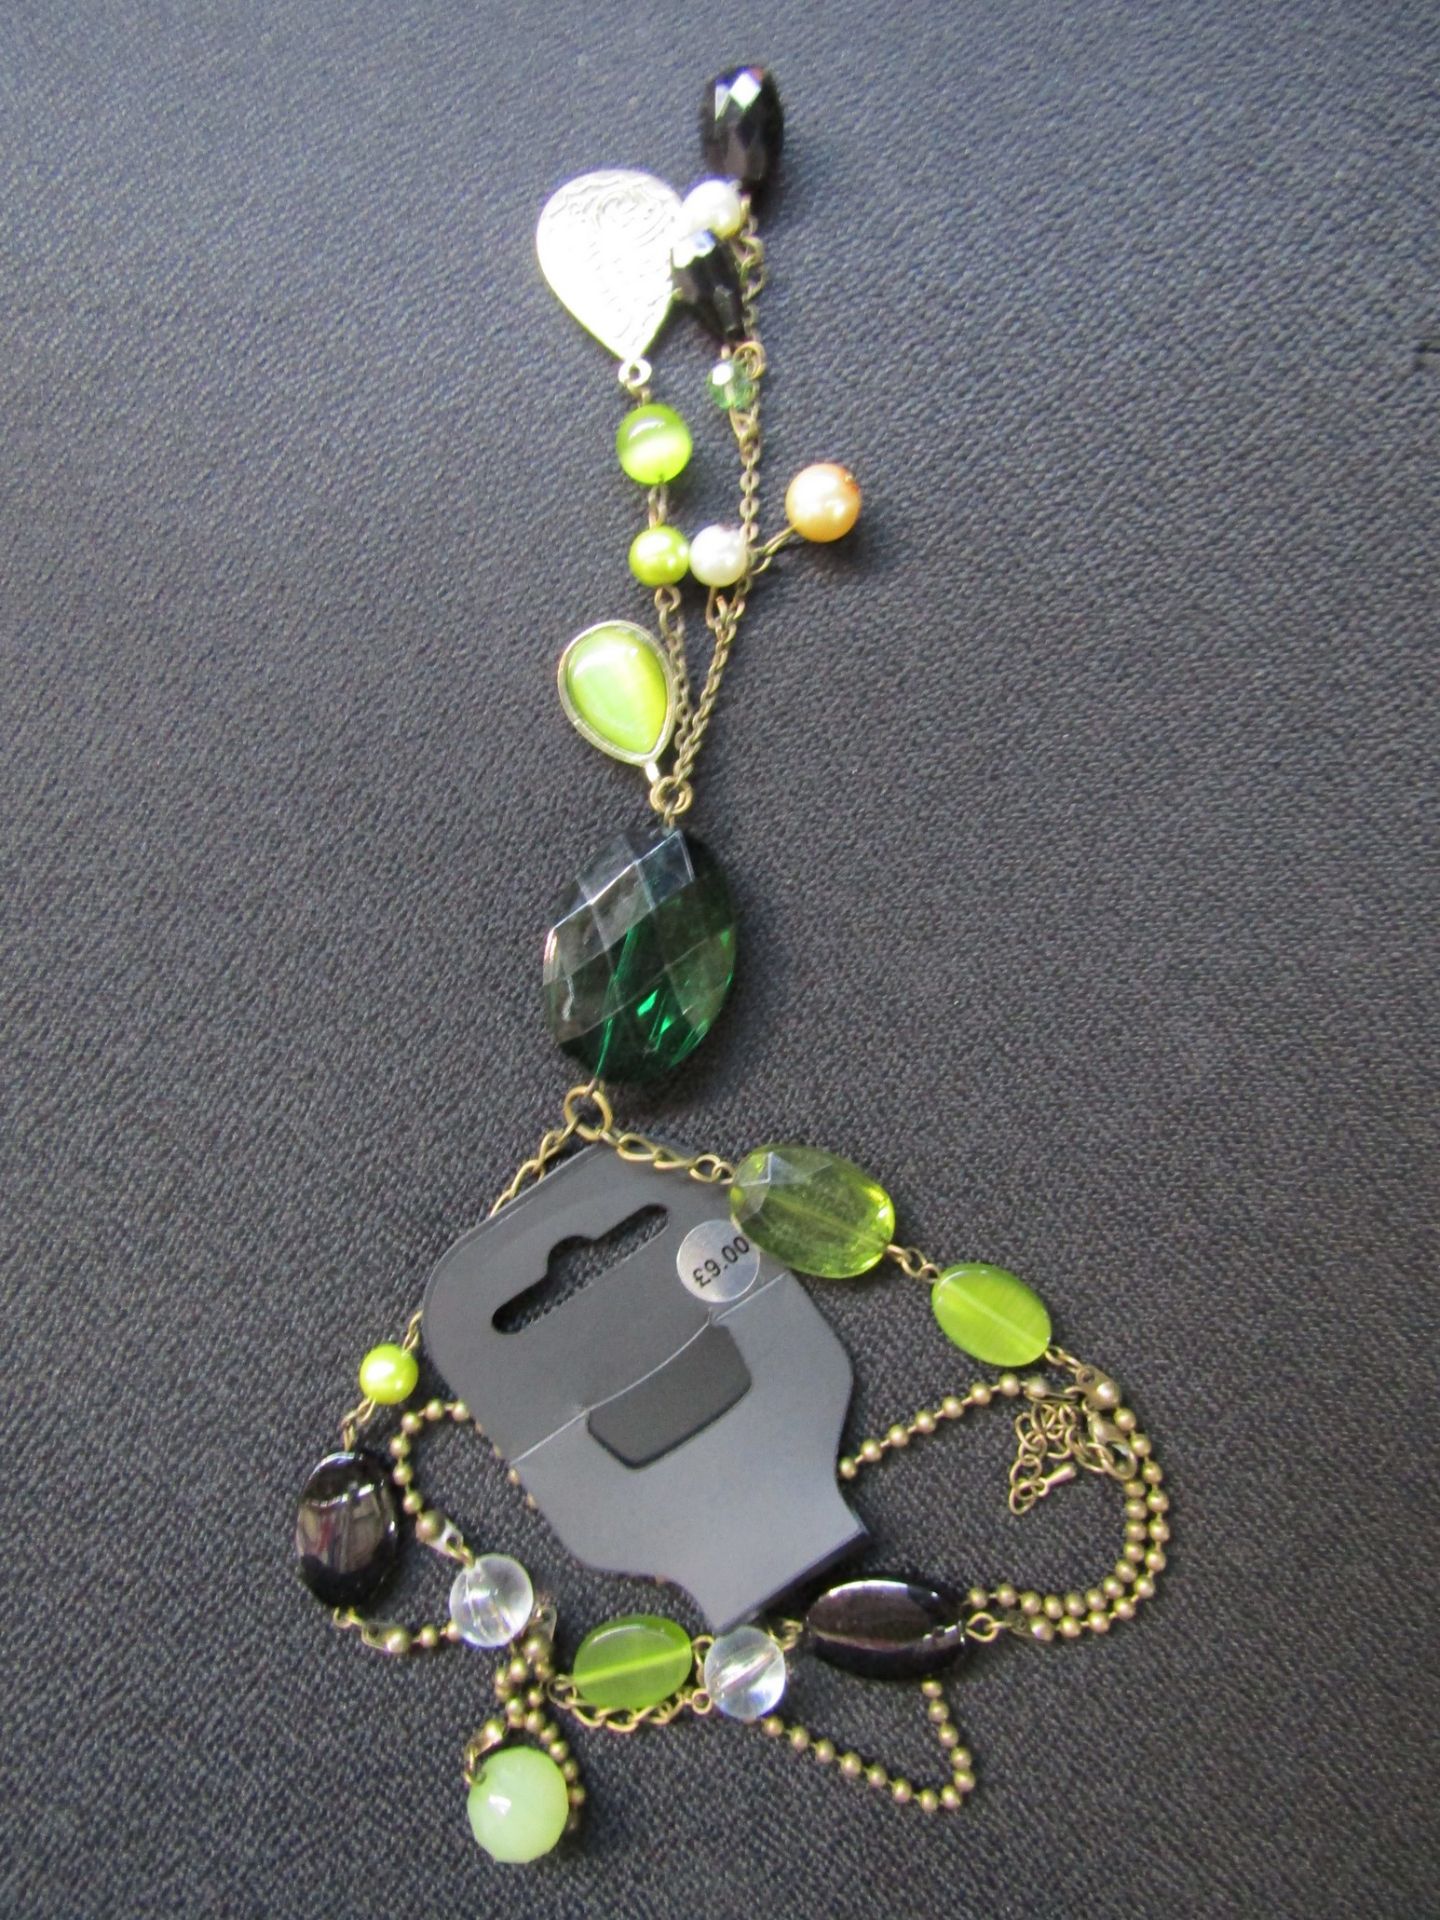 1 BRAND NEW MULTI COLOURED CHARM NECKLACE RRP £9.0